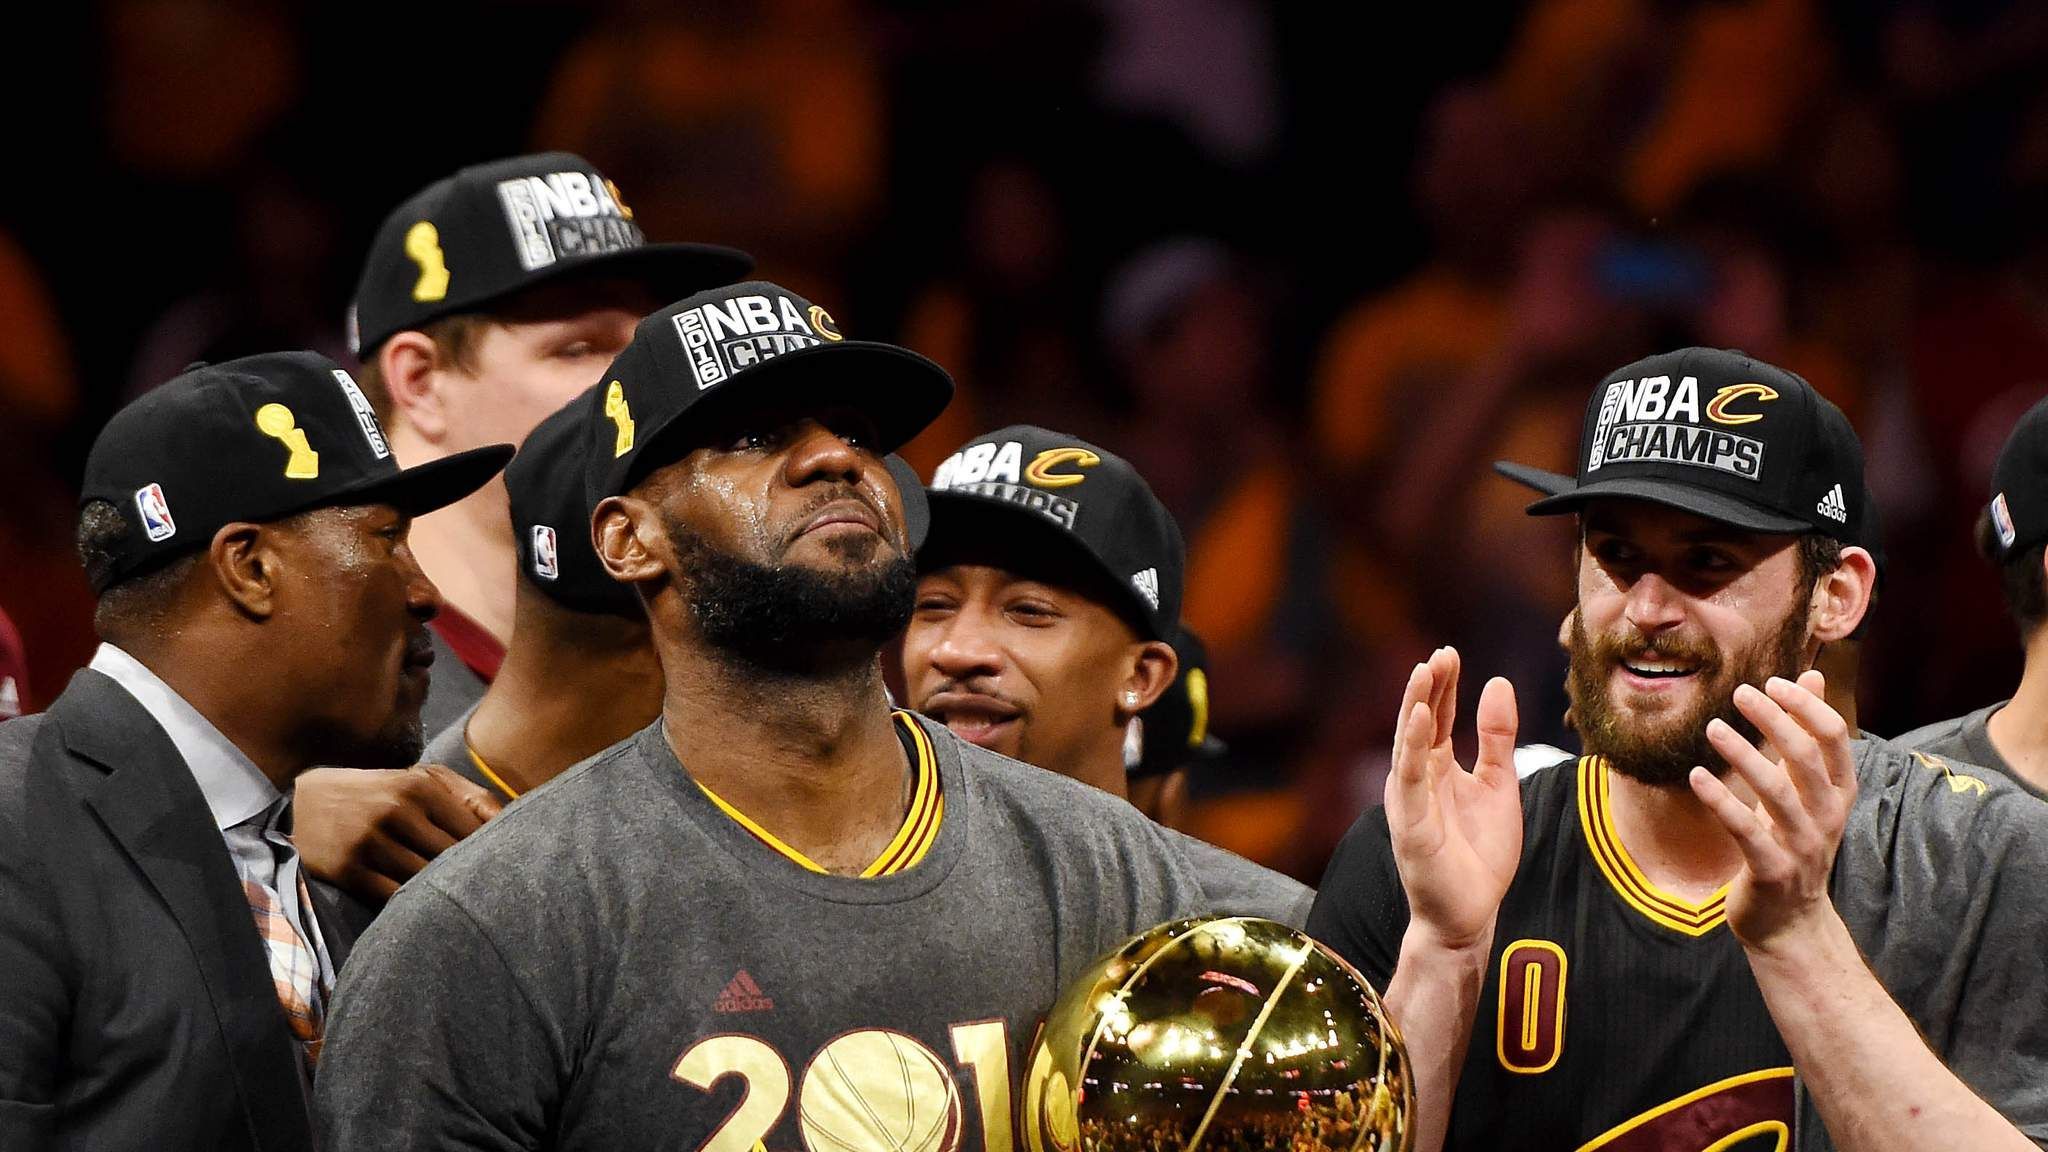 Cleveland Cavaliers win first NBA title